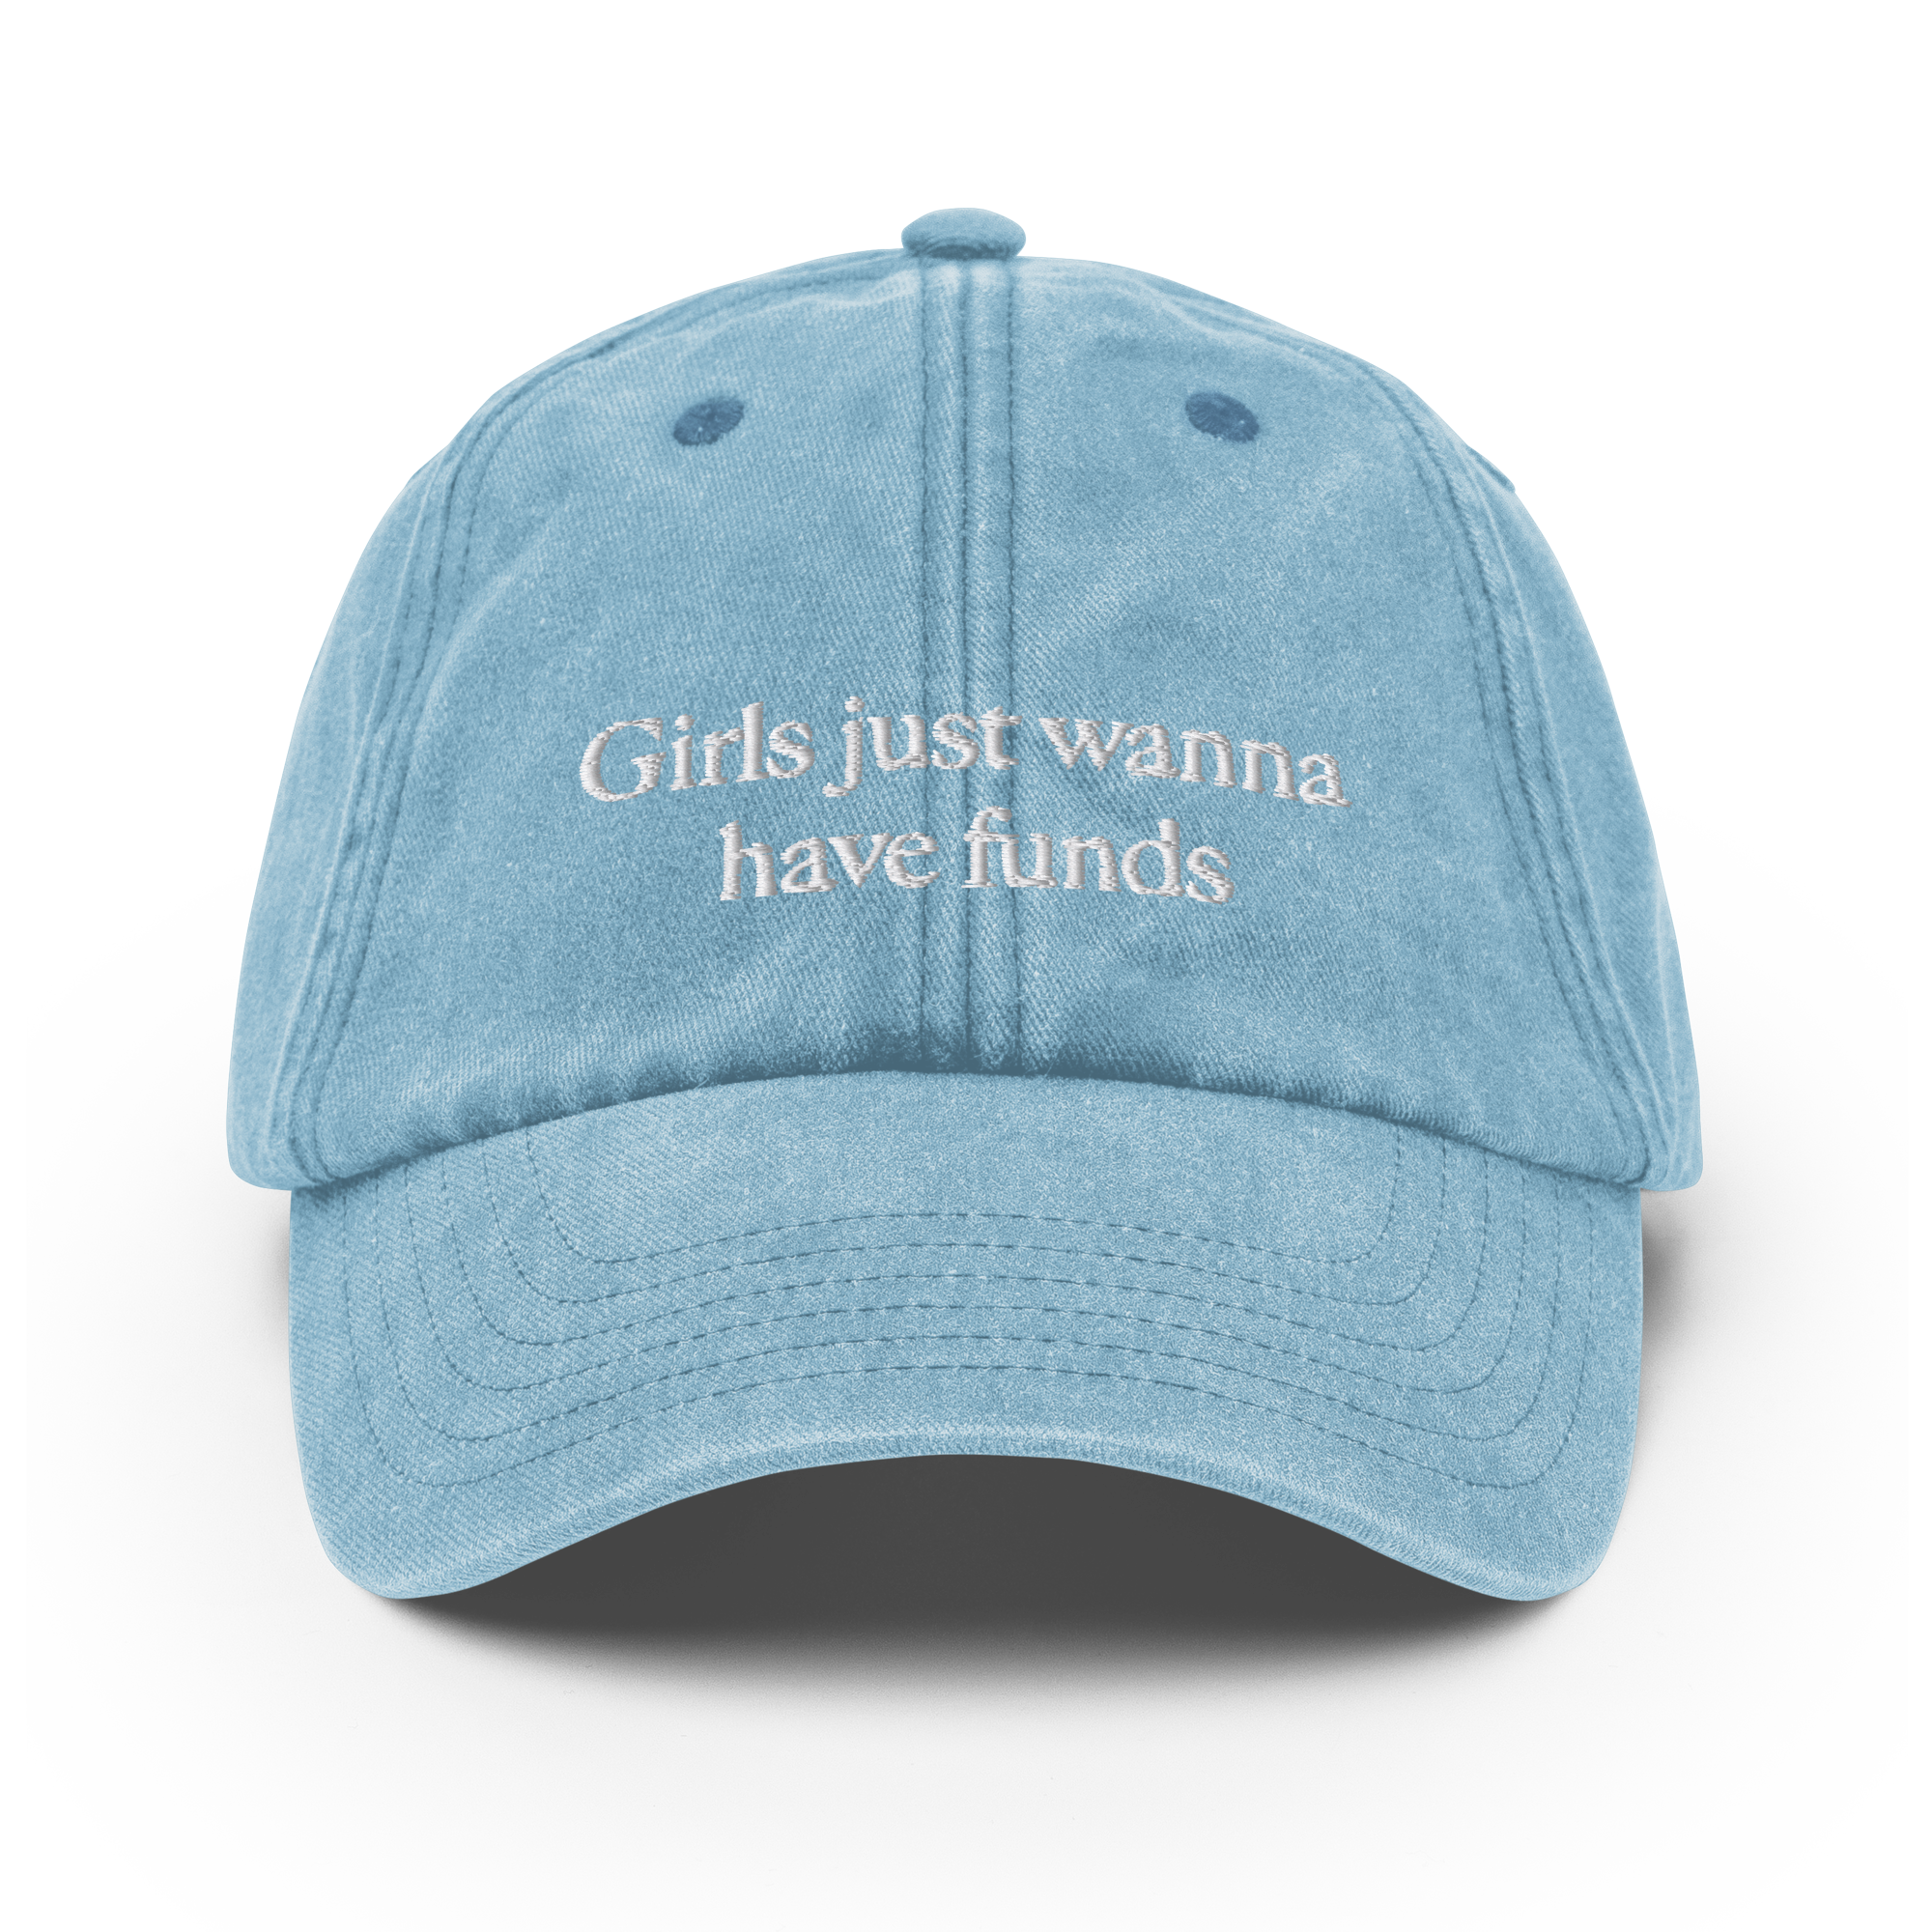 Girls just wanna have funds - Vintage Cap